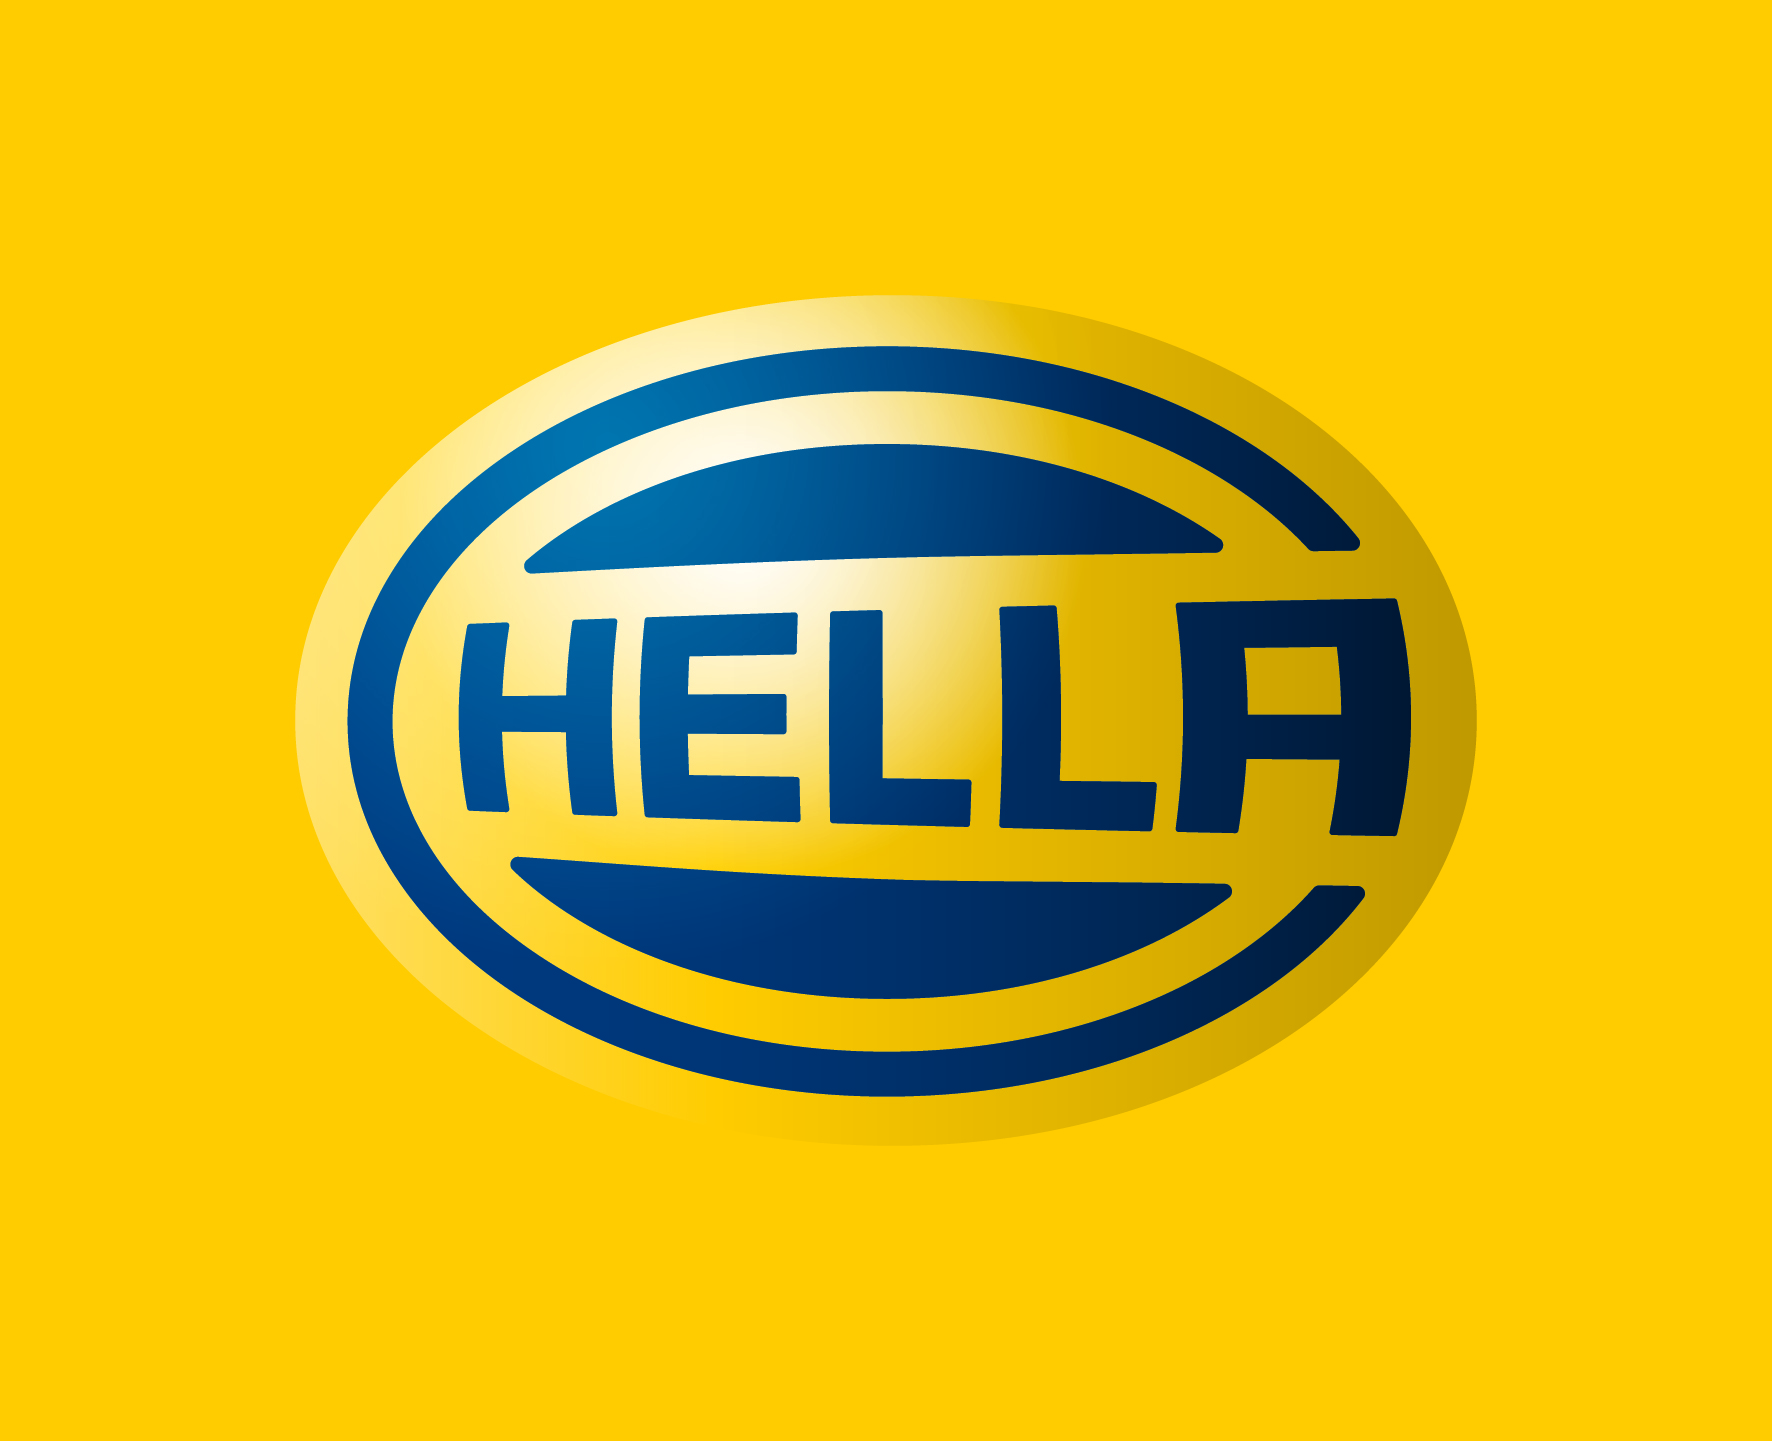 Hella Recognized as GM Supplier of the Year | THE SHOP